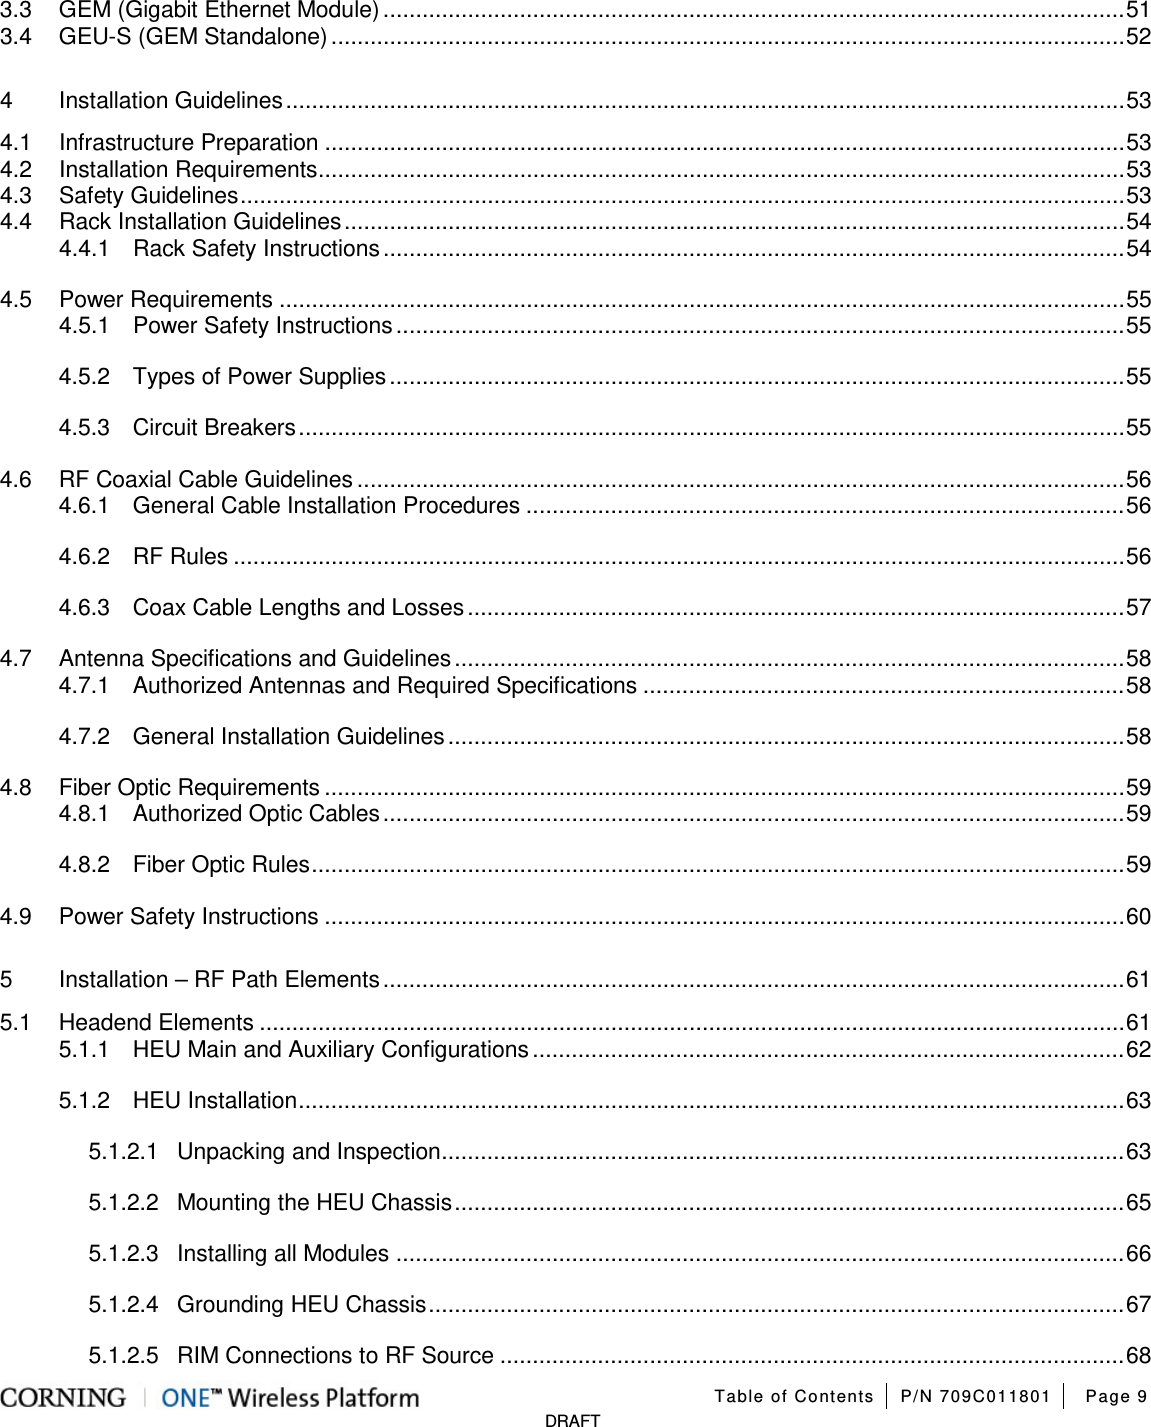   Table of Contents P/N 709C011801 Page 9   DRAFT 3.3 GEM (Gigabit Ethernet Module) .................................................................................................................. 51 3.4 GEU-S (GEM Standalone) .......................................................................................................................... 52 4 Installation Guidelines ................................................................................................................................. 53 4.1 Infrastructure Preparation ........................................................................................................................... 53 4.2 Installation Requirements ............................................................................................................................ 53 4.3 Safety Guidelines ........................................................................................................................................ 53 4.4 Rack Installation Guidelines ........................................................................................................................ 54 4.4.1 Rack Safety Instructions .................................................................................................................. 54 4.5 Power Requirements .................................................................................................................................. 55 4.5.1 Power Safety Instructions ................................................................................................................ 55 4.5.2 Types of Power Supplies ................................................................................................................. 55 4.5.3 Circuit Breakers ............................................................................................................................... 55 4.6 RF Coaxial Cable Guidelines ...................................................................................................................... 56 4.6.1 General Cable Installation Procedures ............................................................................................ 56 4.6.2 RF Rules ......................................................................................................................................... 56 4.6.3 Coax Cable Lengths and Losses ..................................................................................................... 57 4.7 Antenna Specifications and Guidelines ....................................................................................................... 58 4.7.1 Authorized Antennas and Required Specifications .......................................................................... 58 4.7.2 General Installation Guidelines ........................................................................................................ 58 4.8 Fiber Optic Requirements ........................................................................................................................... 59 4.8.1 Authorized Optic Cables .................................................................................................................. 59 4.8.2 Fiber Optic Rules ............................................................................................................................. 59 4.9 Power Safety Instructions ........................................................................................................................... 60 5 Installation – RF Path Elements .................................................................................................................. 61 5.1 Headend Elements ..................................................................................................................................... 61 5.1.1 HEU Main and Auxiliary Configurations ........................................................................................... 62 5.1.2 HEU Installation ............................................................................................................................... 63 5.1.2.1 Unpacking and Inspection ......................................................................................................... 63 5.1.2.2 Mounting the HEU Chassis ....................................................................................................... 65 5.1.2.3 Installing all Modules ................................................................................................................ 66 5.1.2.4 Grounding HEU Chassis ........................................................................................................... 67 5.1.2.5 RIM Connections to RF Source ................................................................................................ 68 